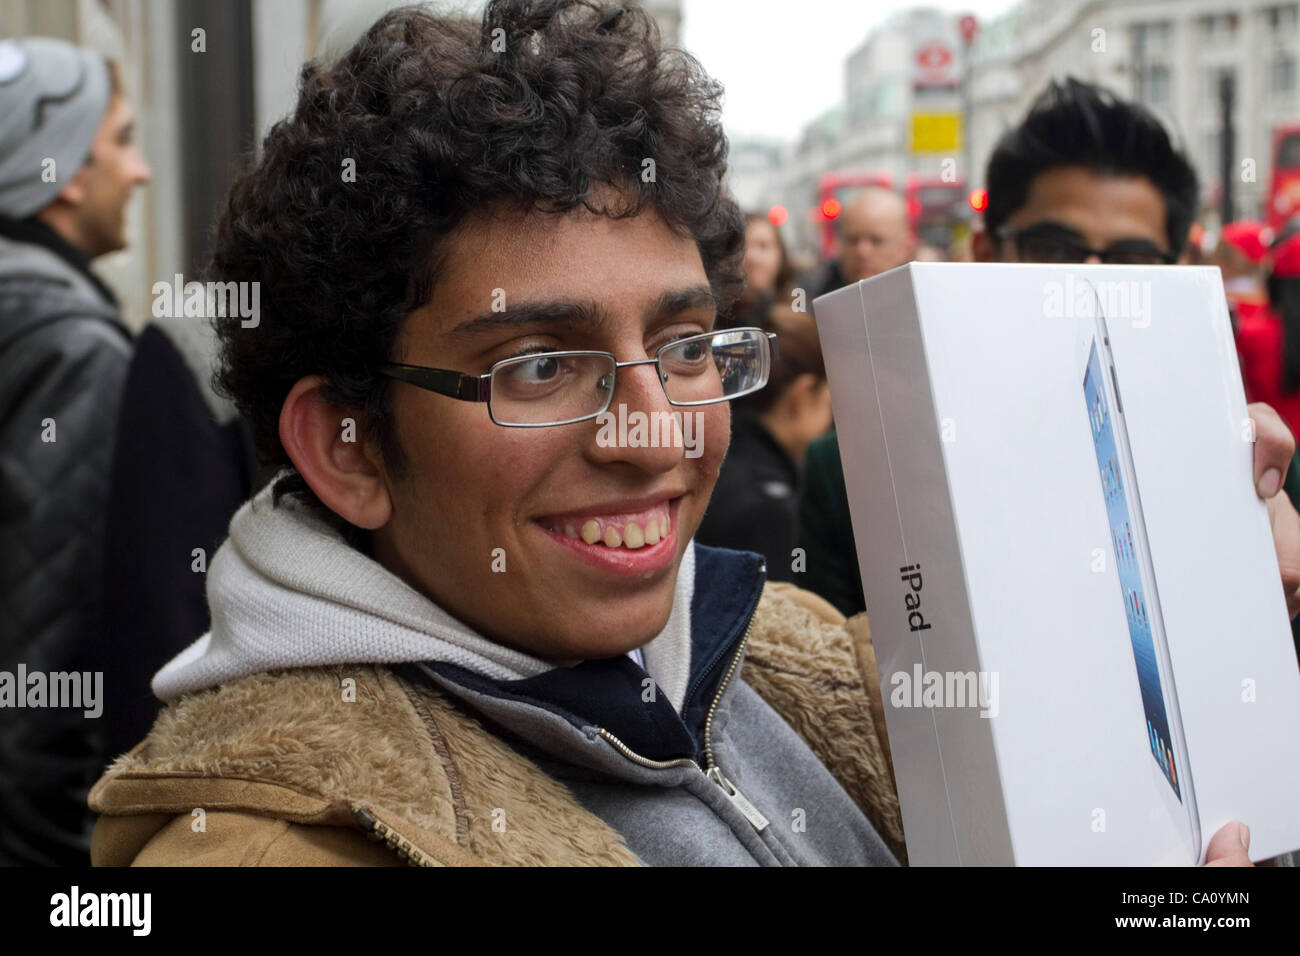 Since Saturday10th March 2012 <b>ZOHAIB ALI</b> been camping ... - london-uk-160312zohaib-ali-pictured-holding-his-new-ipad-the-third-CA0YMN